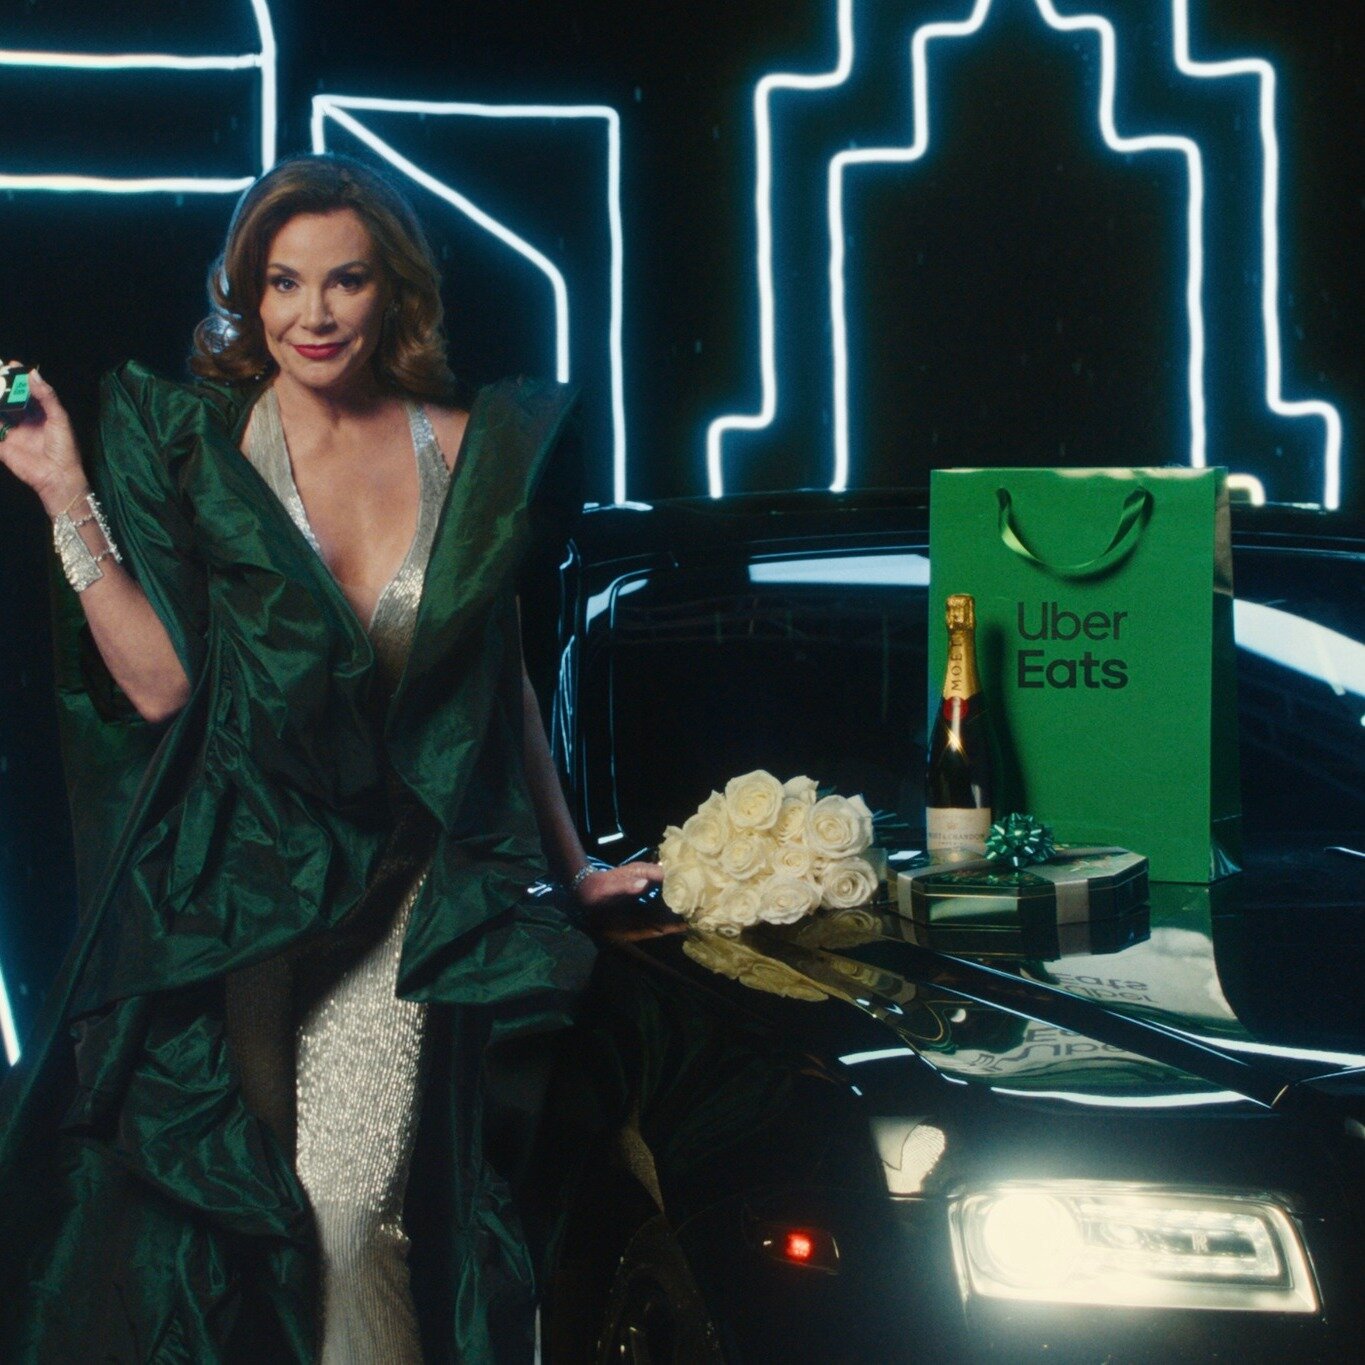 The black Rolls Royce Ghost we provided for @ubereats really classed things up! See it in the new spot featuring @countessluann